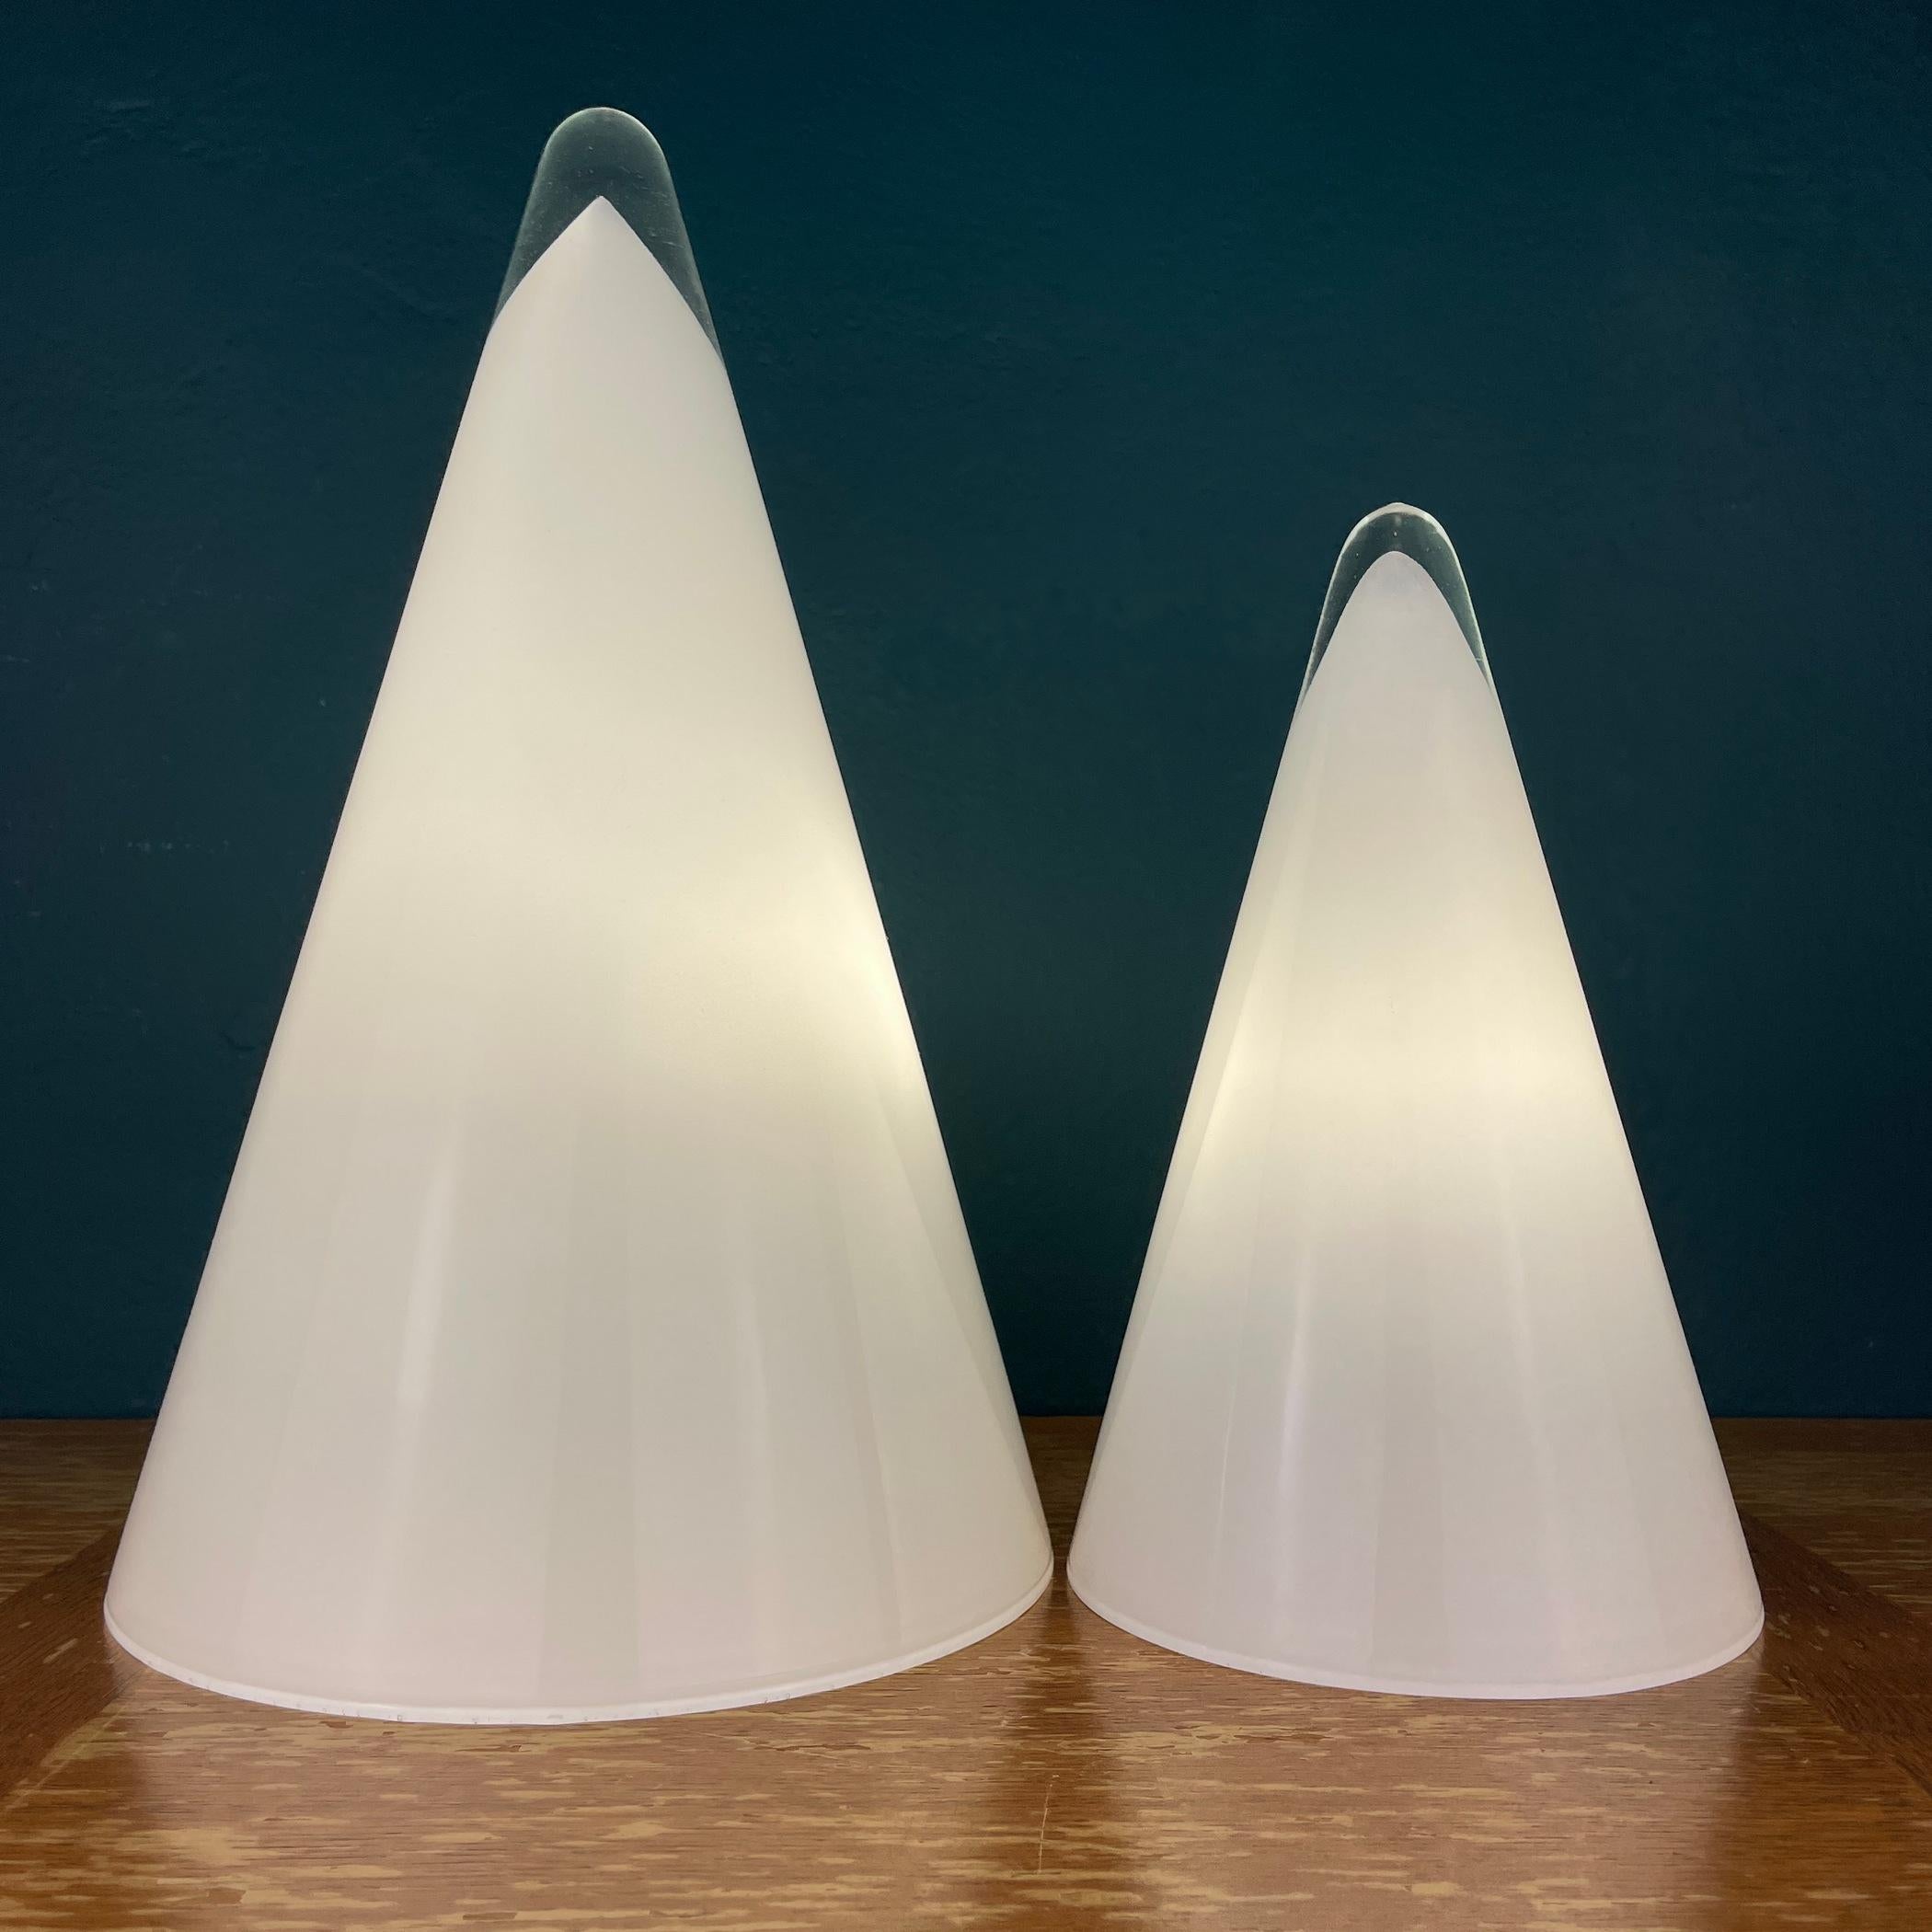 The pair of beautiful Murano cone lamps made in Italy in the 1970s. Excellent condition, no damage. Cable length 240 cm. European plug. Big lamp: Height: 35 centimeters Width: 22 centimeters Small lamp: Height: 26 centimeters Width: 16 centimeters